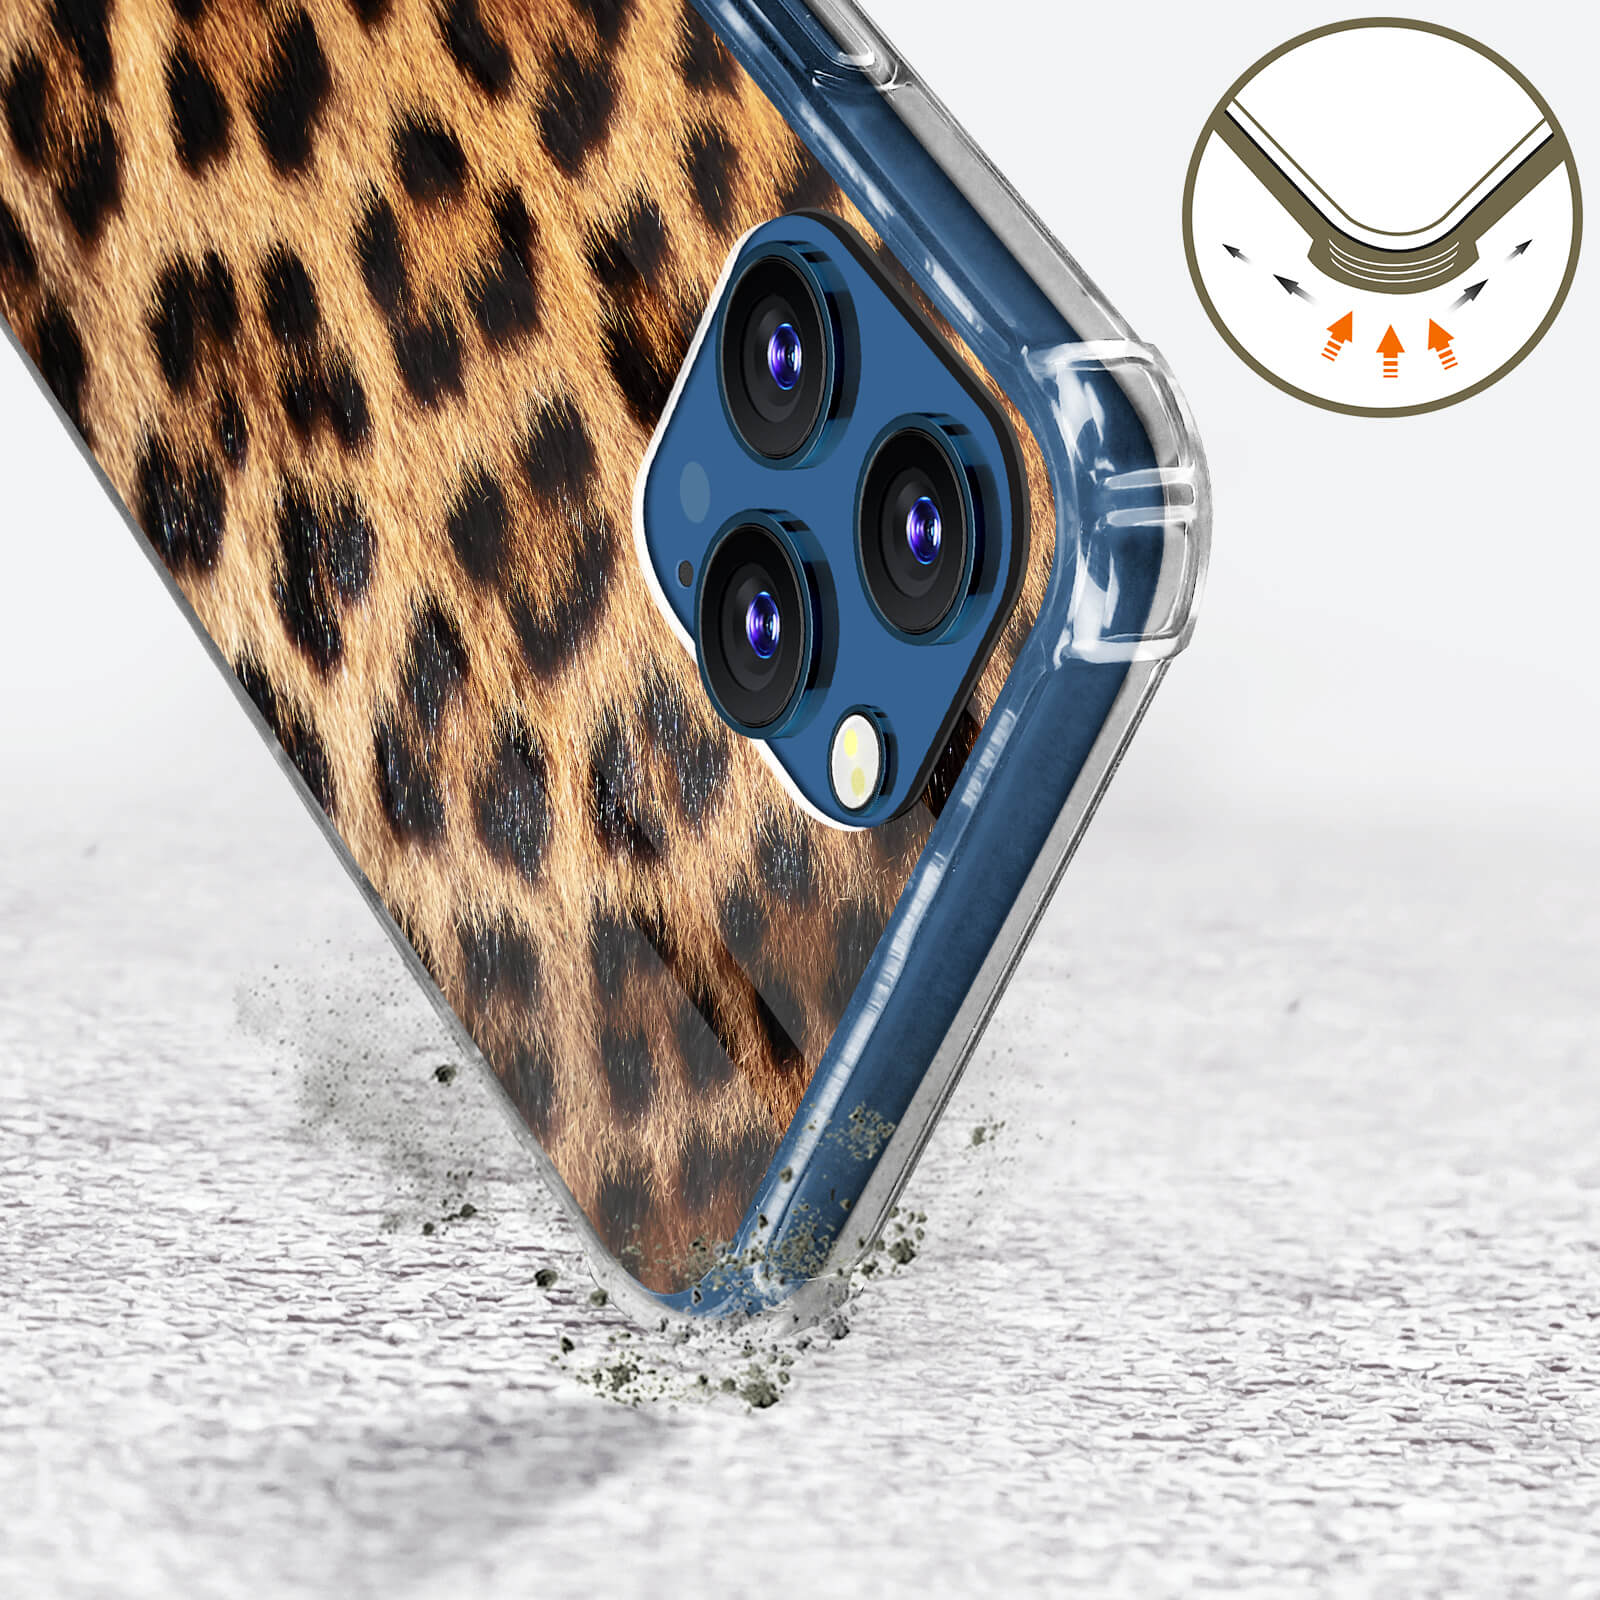 Max, Series, Leopard Pro Muster Apple, 12 iPhone Backcover, Orange GUESS